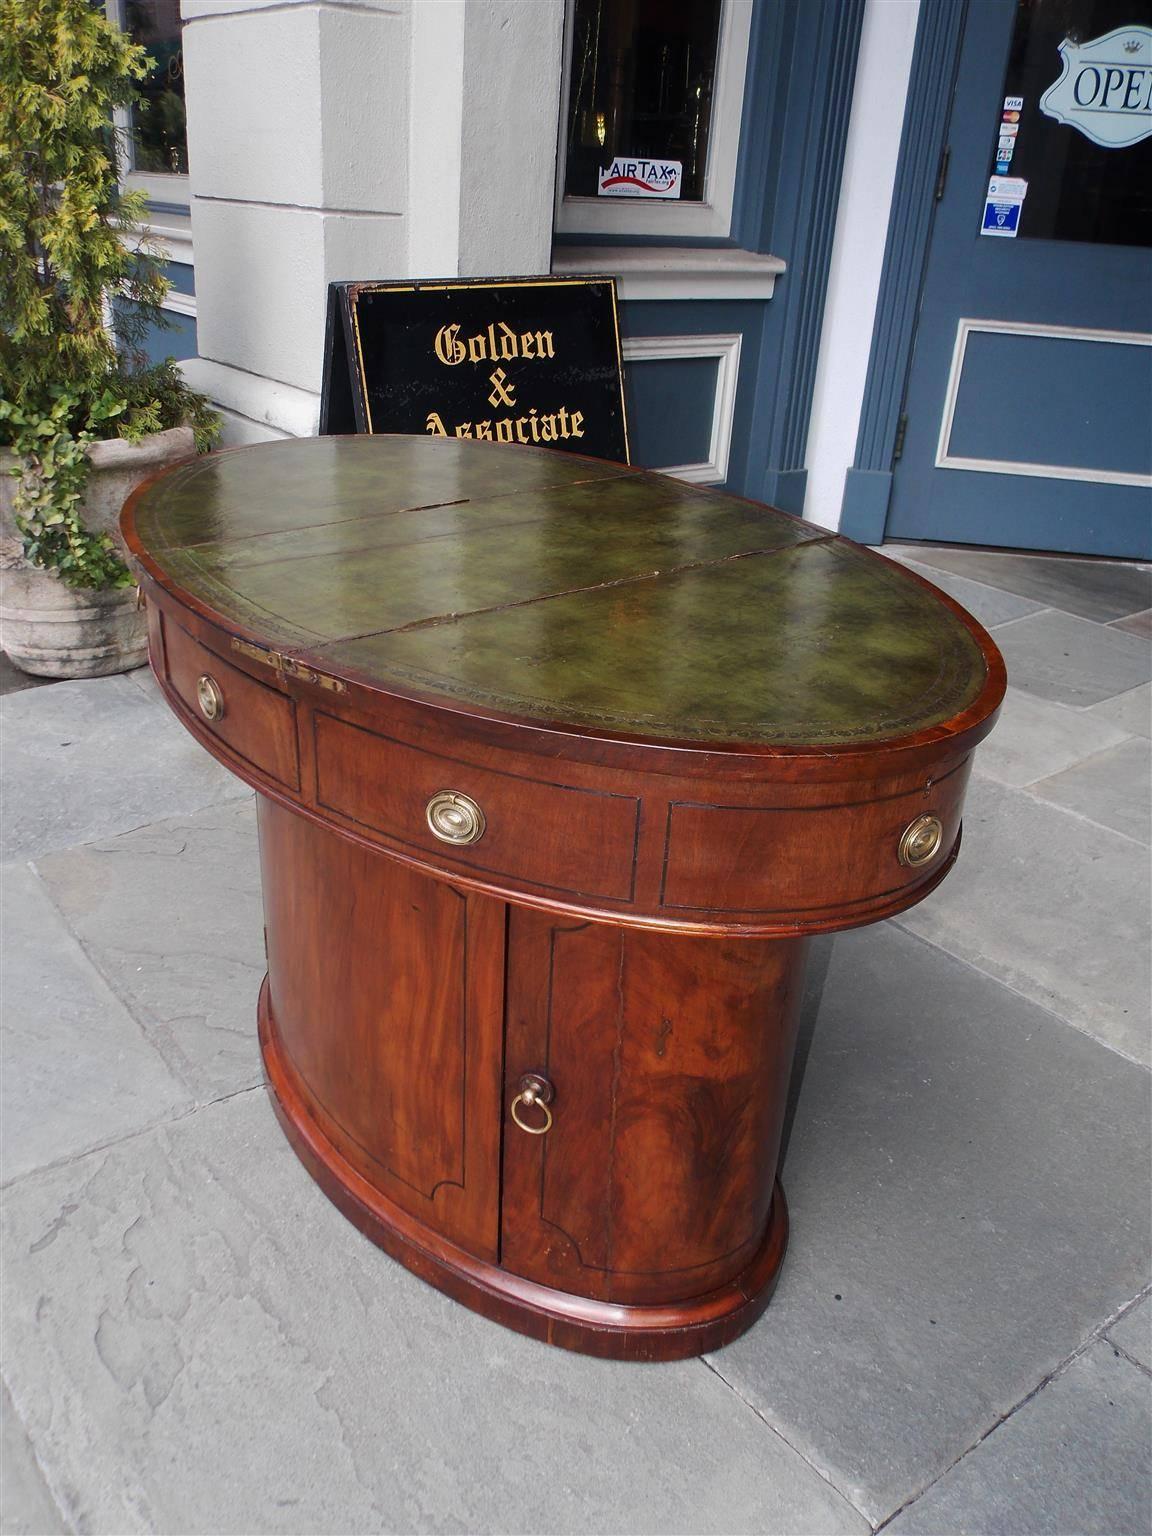 English mahogany oval sea captains desk with hinged leather top concealing two upper hidden compartments, single front drawer, original brasses, ebony string inlay, two hinged lower cabinets with interior shelving, and resting on a carved molded